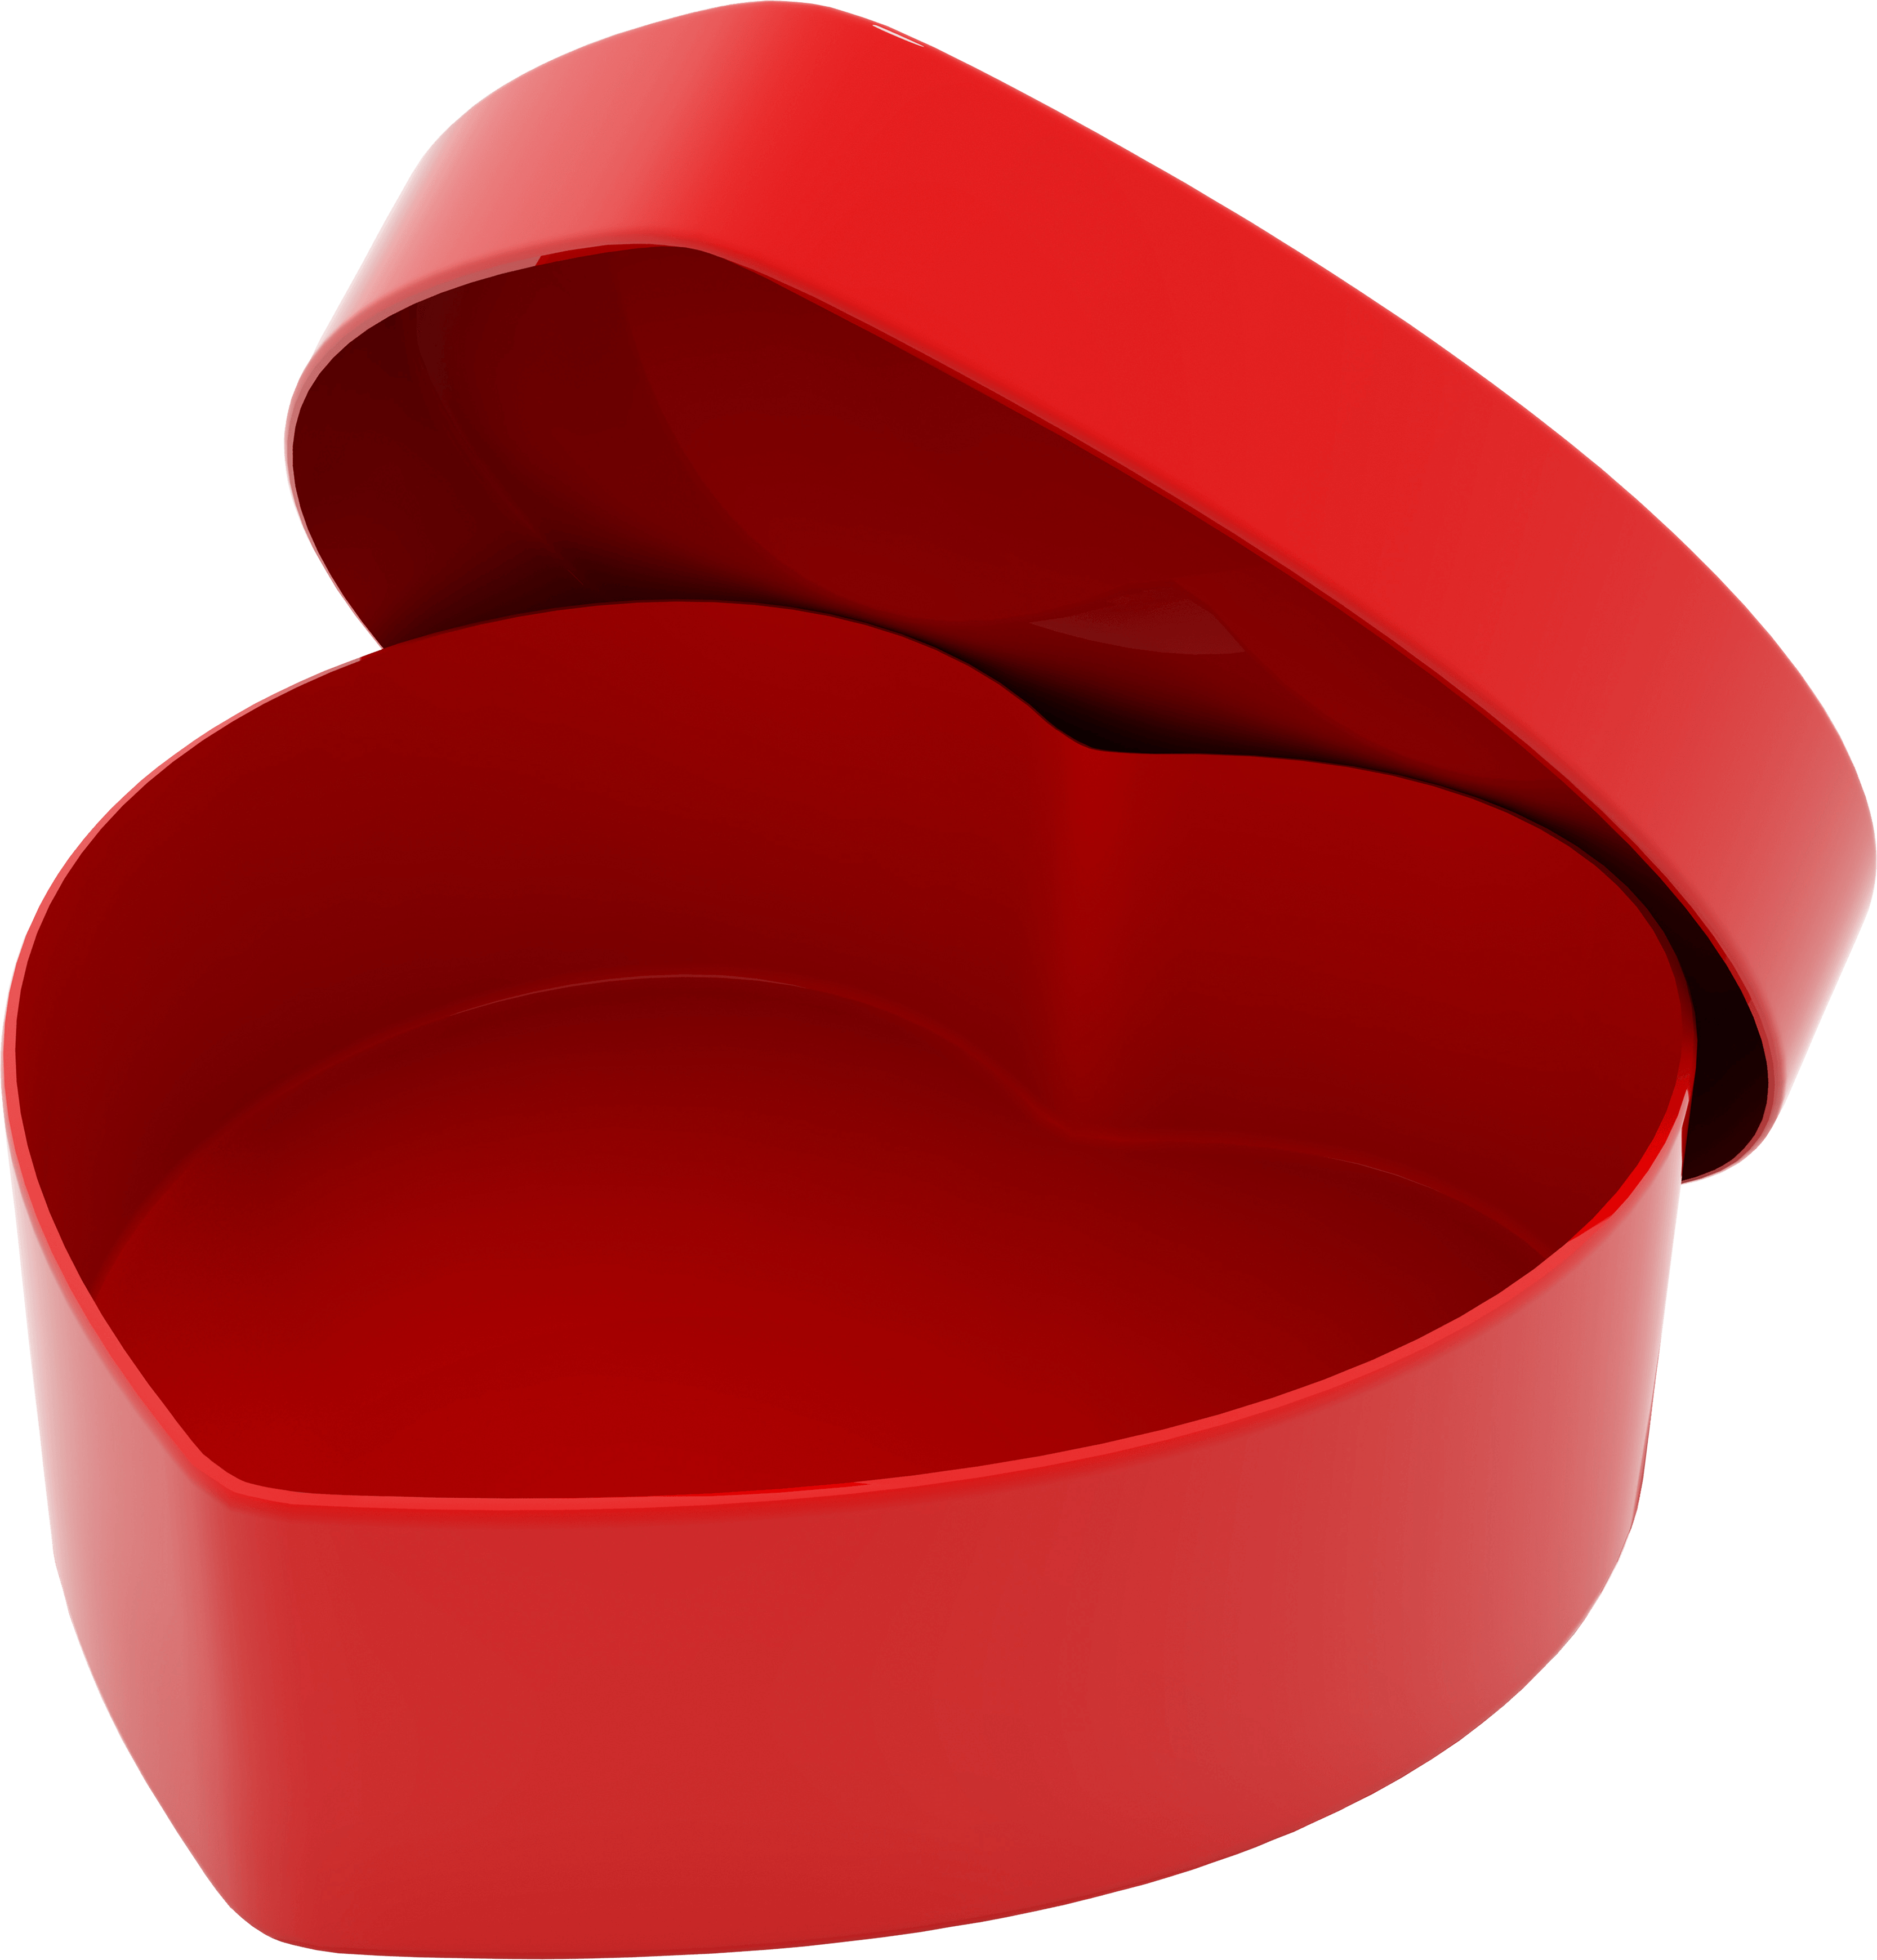 Gift Red Box Png Image PNG Image